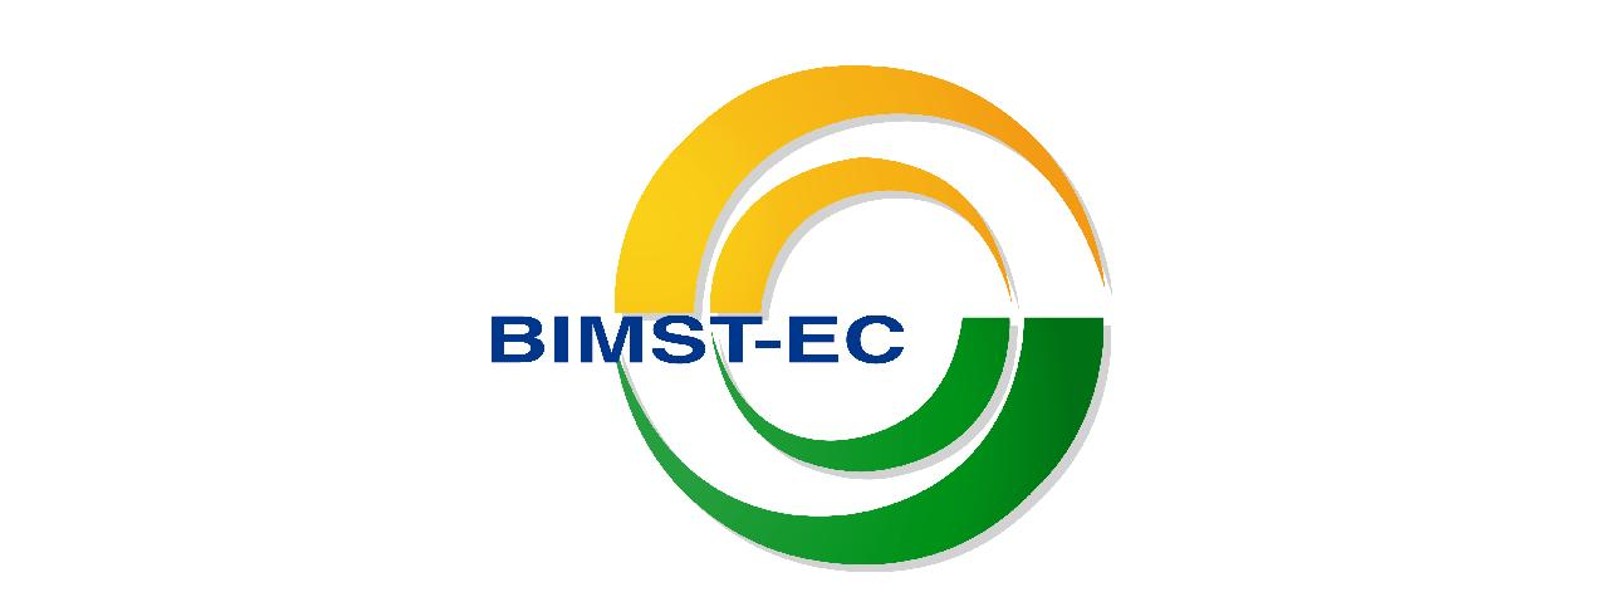 BIMSTEC Foreign Minister conference today (29)